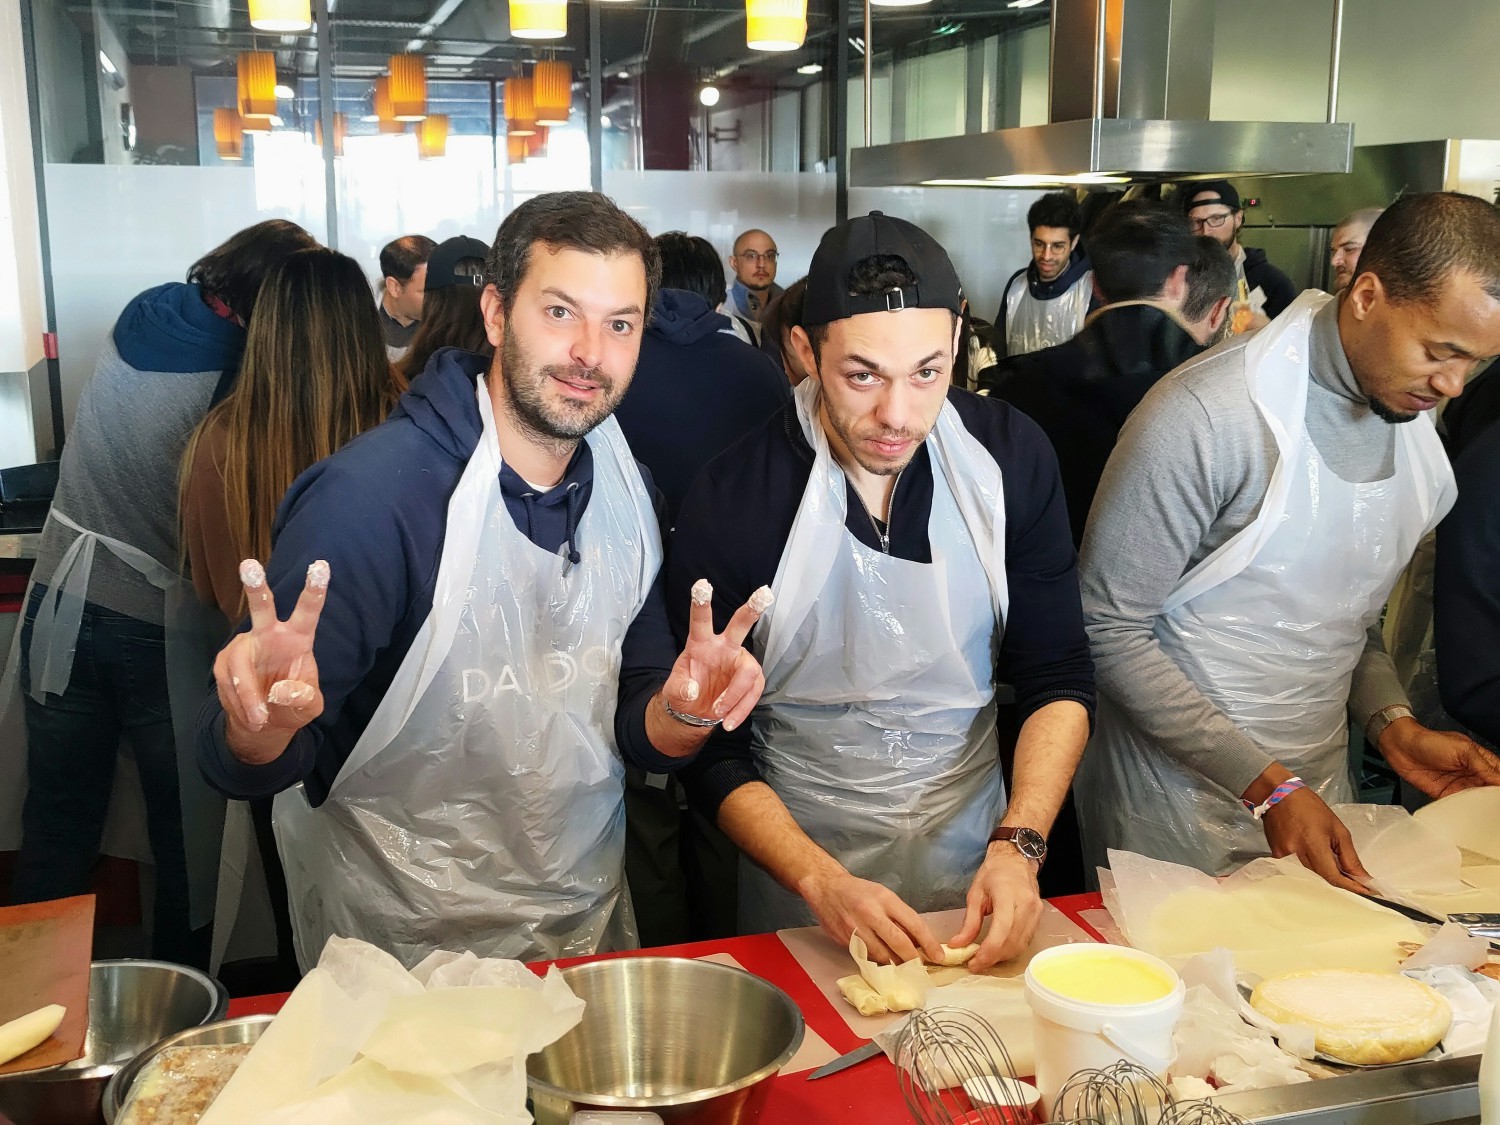 Our most recent offsite included a cooking class amongst teams.